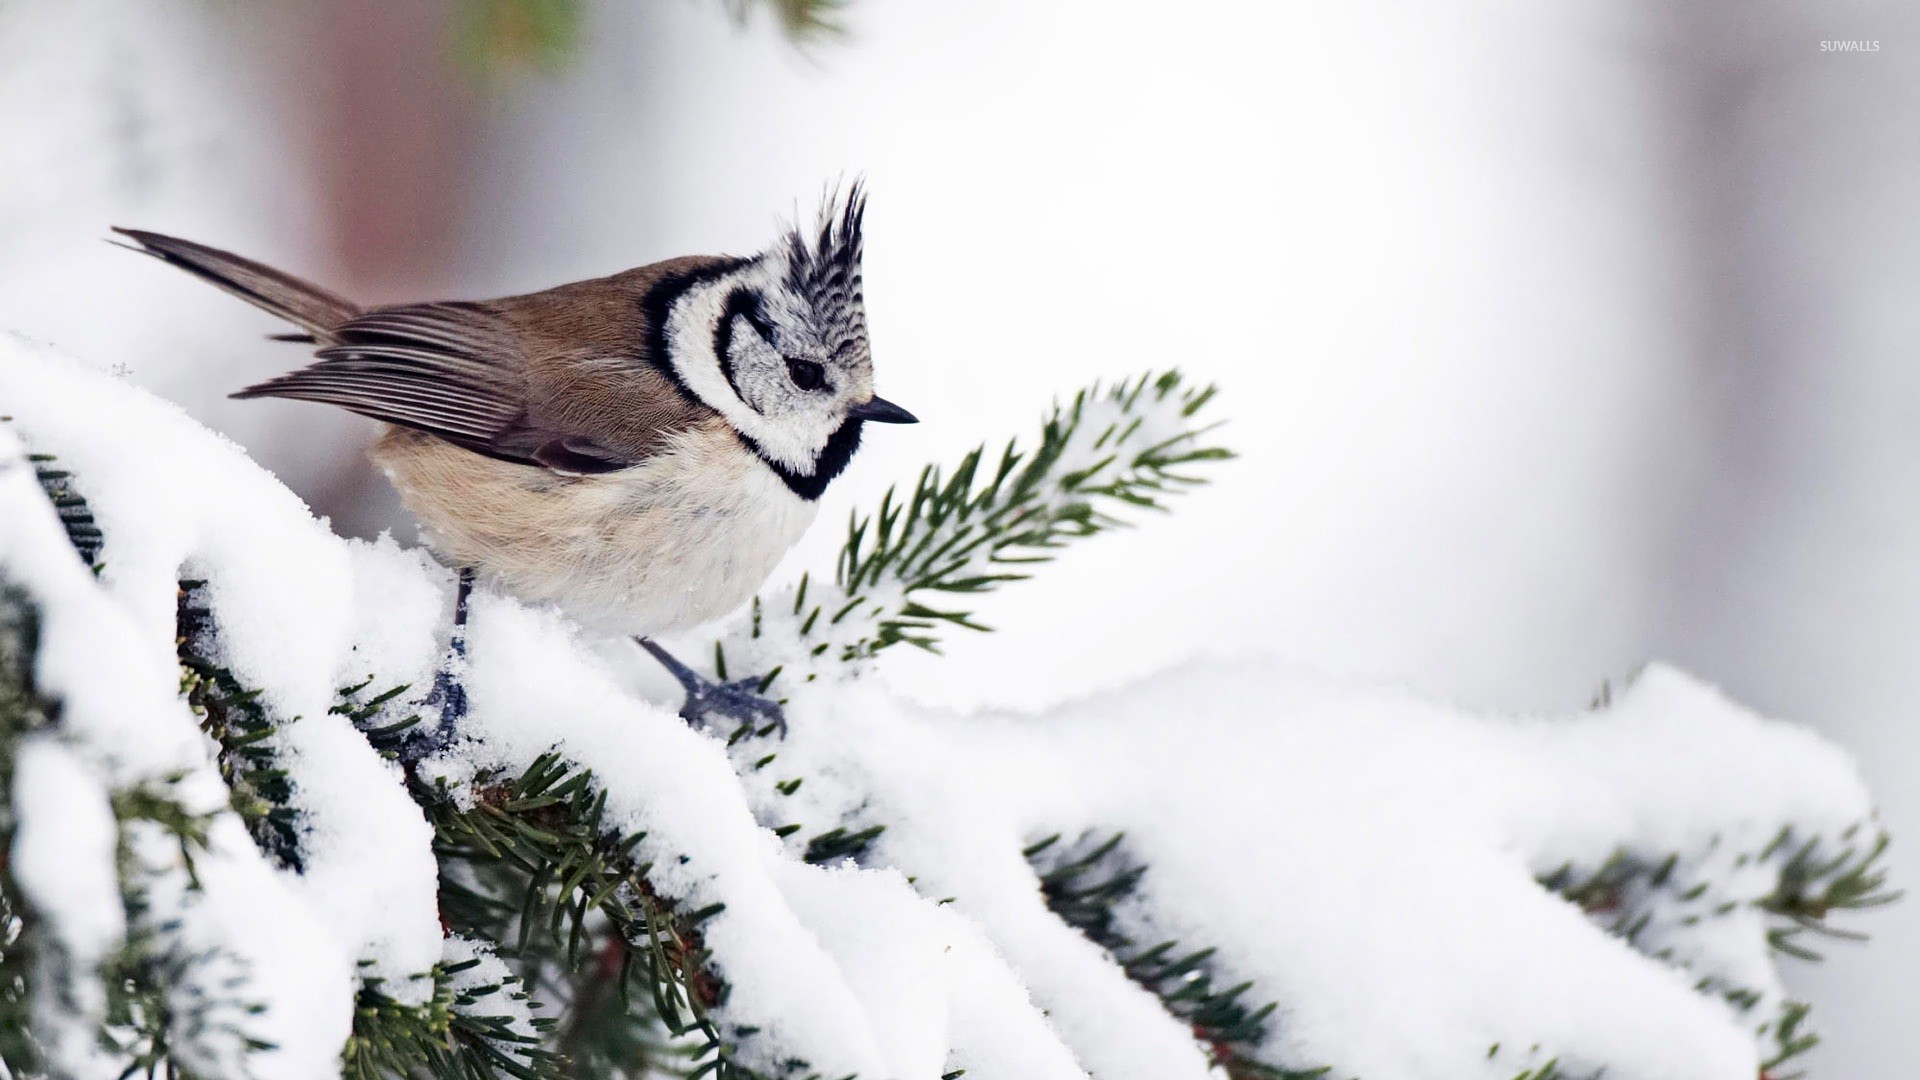 Tufted Titmouse On A Snowy Fir Branch Wallpaper Animal